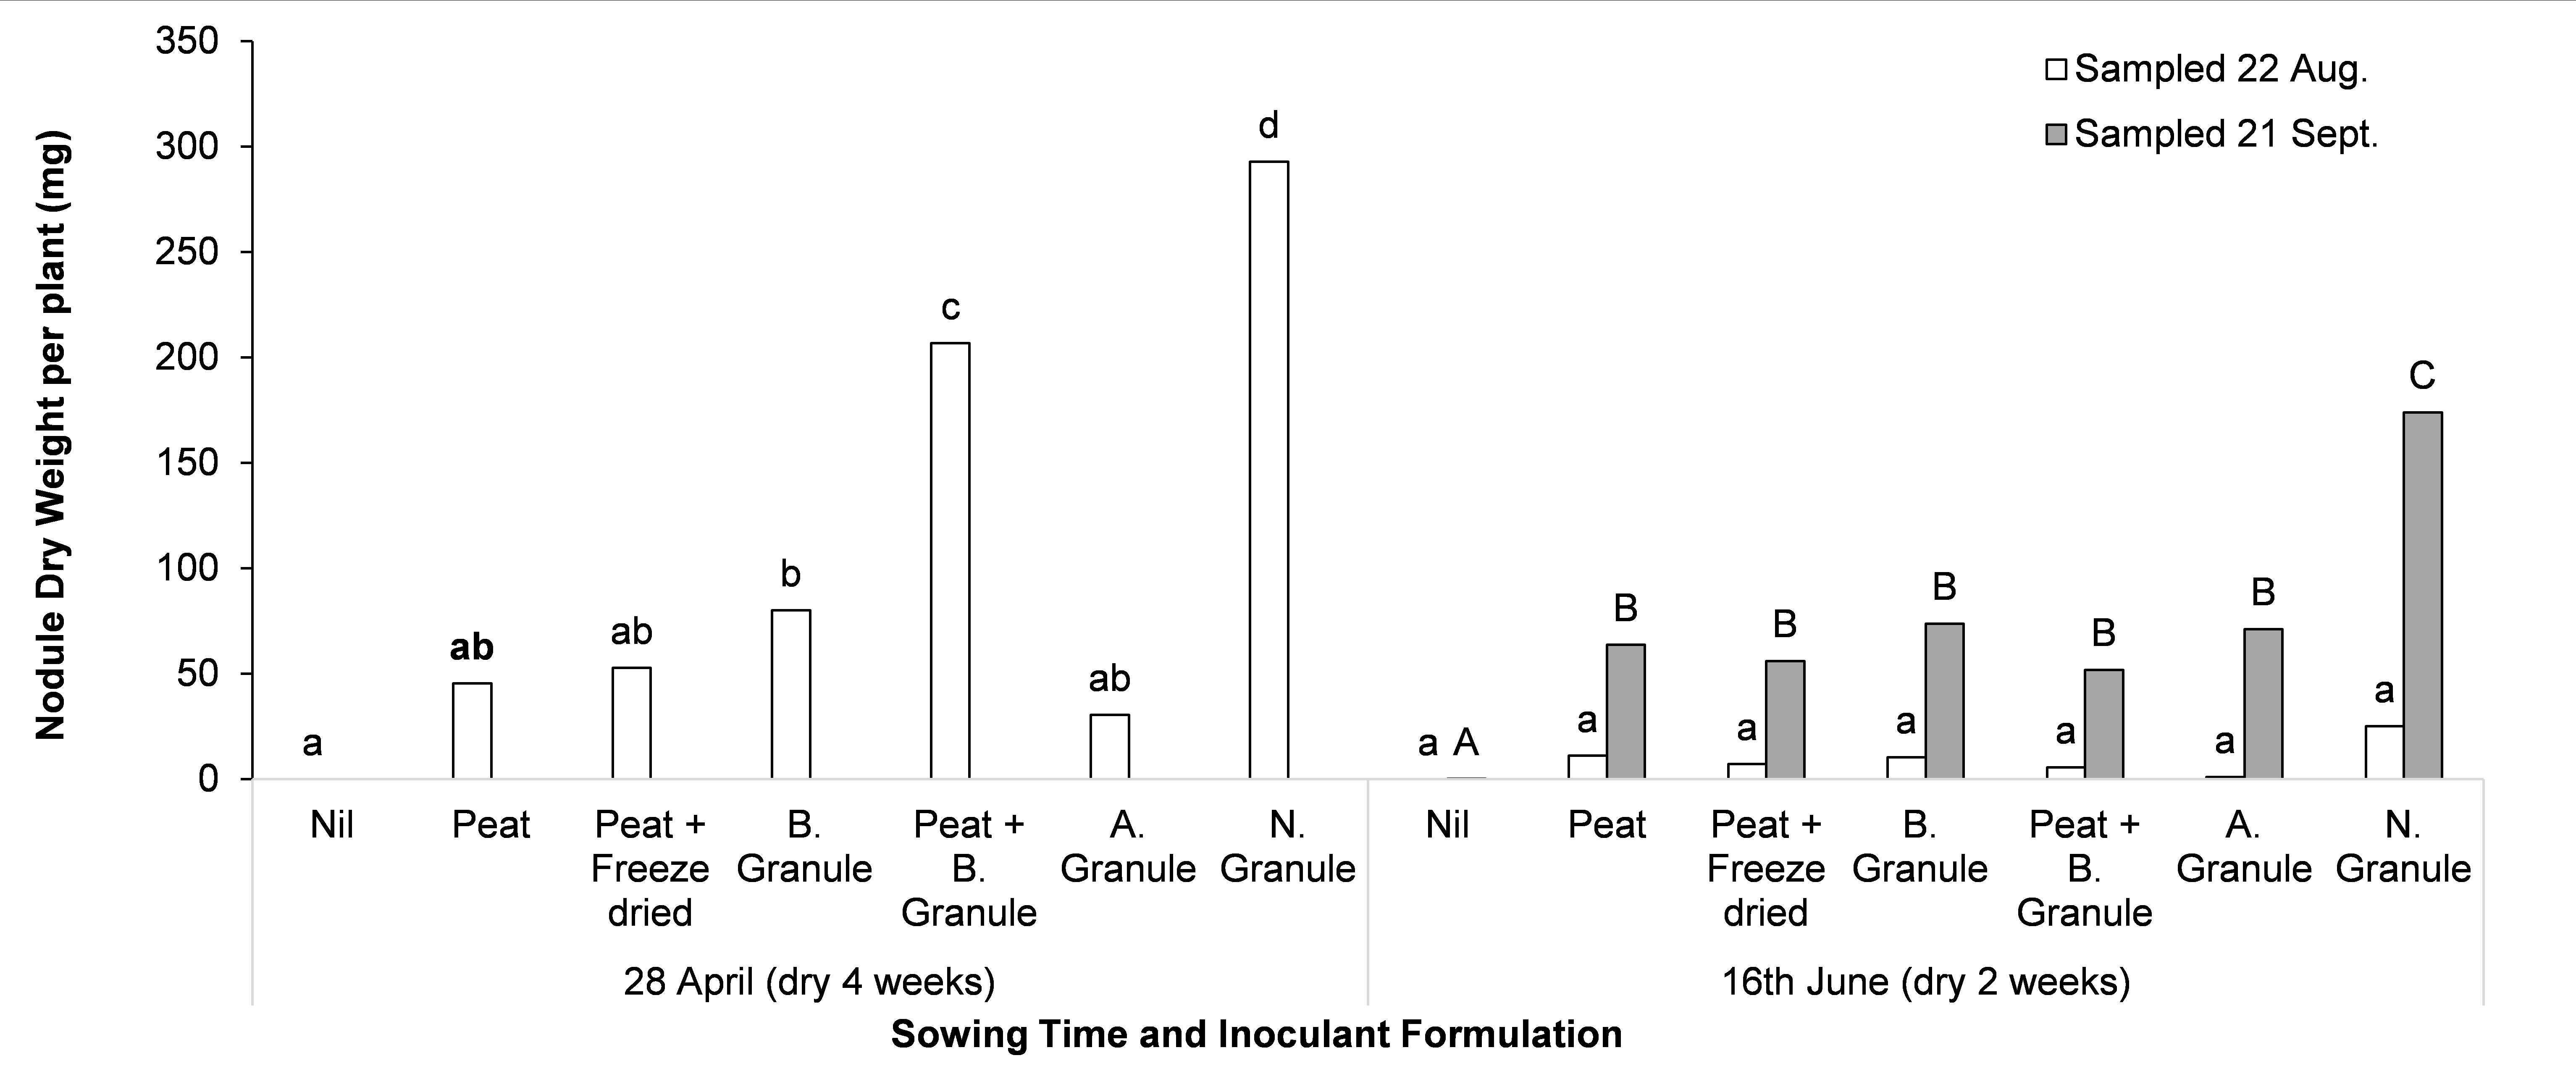 Figure 2. Nodulation of faba bean when sown dry (28 April — approximately four weeks between sowing and sufficient rainfall for germination, and 16 June — approximately two weeks between sowing and sufficient rainfall for germination) and when different inoculant applications were applied at Wanilla, SA. Nodule weight per plant was measured on the 22 of August and 21 of September. Letters that differ within a sampling time indicate significance at P<0.05. All inoculants are group F; peat slurry on seed (Peat) and BASF granules (B. Granule) were supplied by BASF and applied separately or in combination, Freeze dried inoculant (Freeze dried) was supplied by New Edge Microbials (applied with the Peat treatment), Alosca granules (A. Granule) were sourced from Landmark and Novozymes (N. Granule) were supplied by Novozymes.